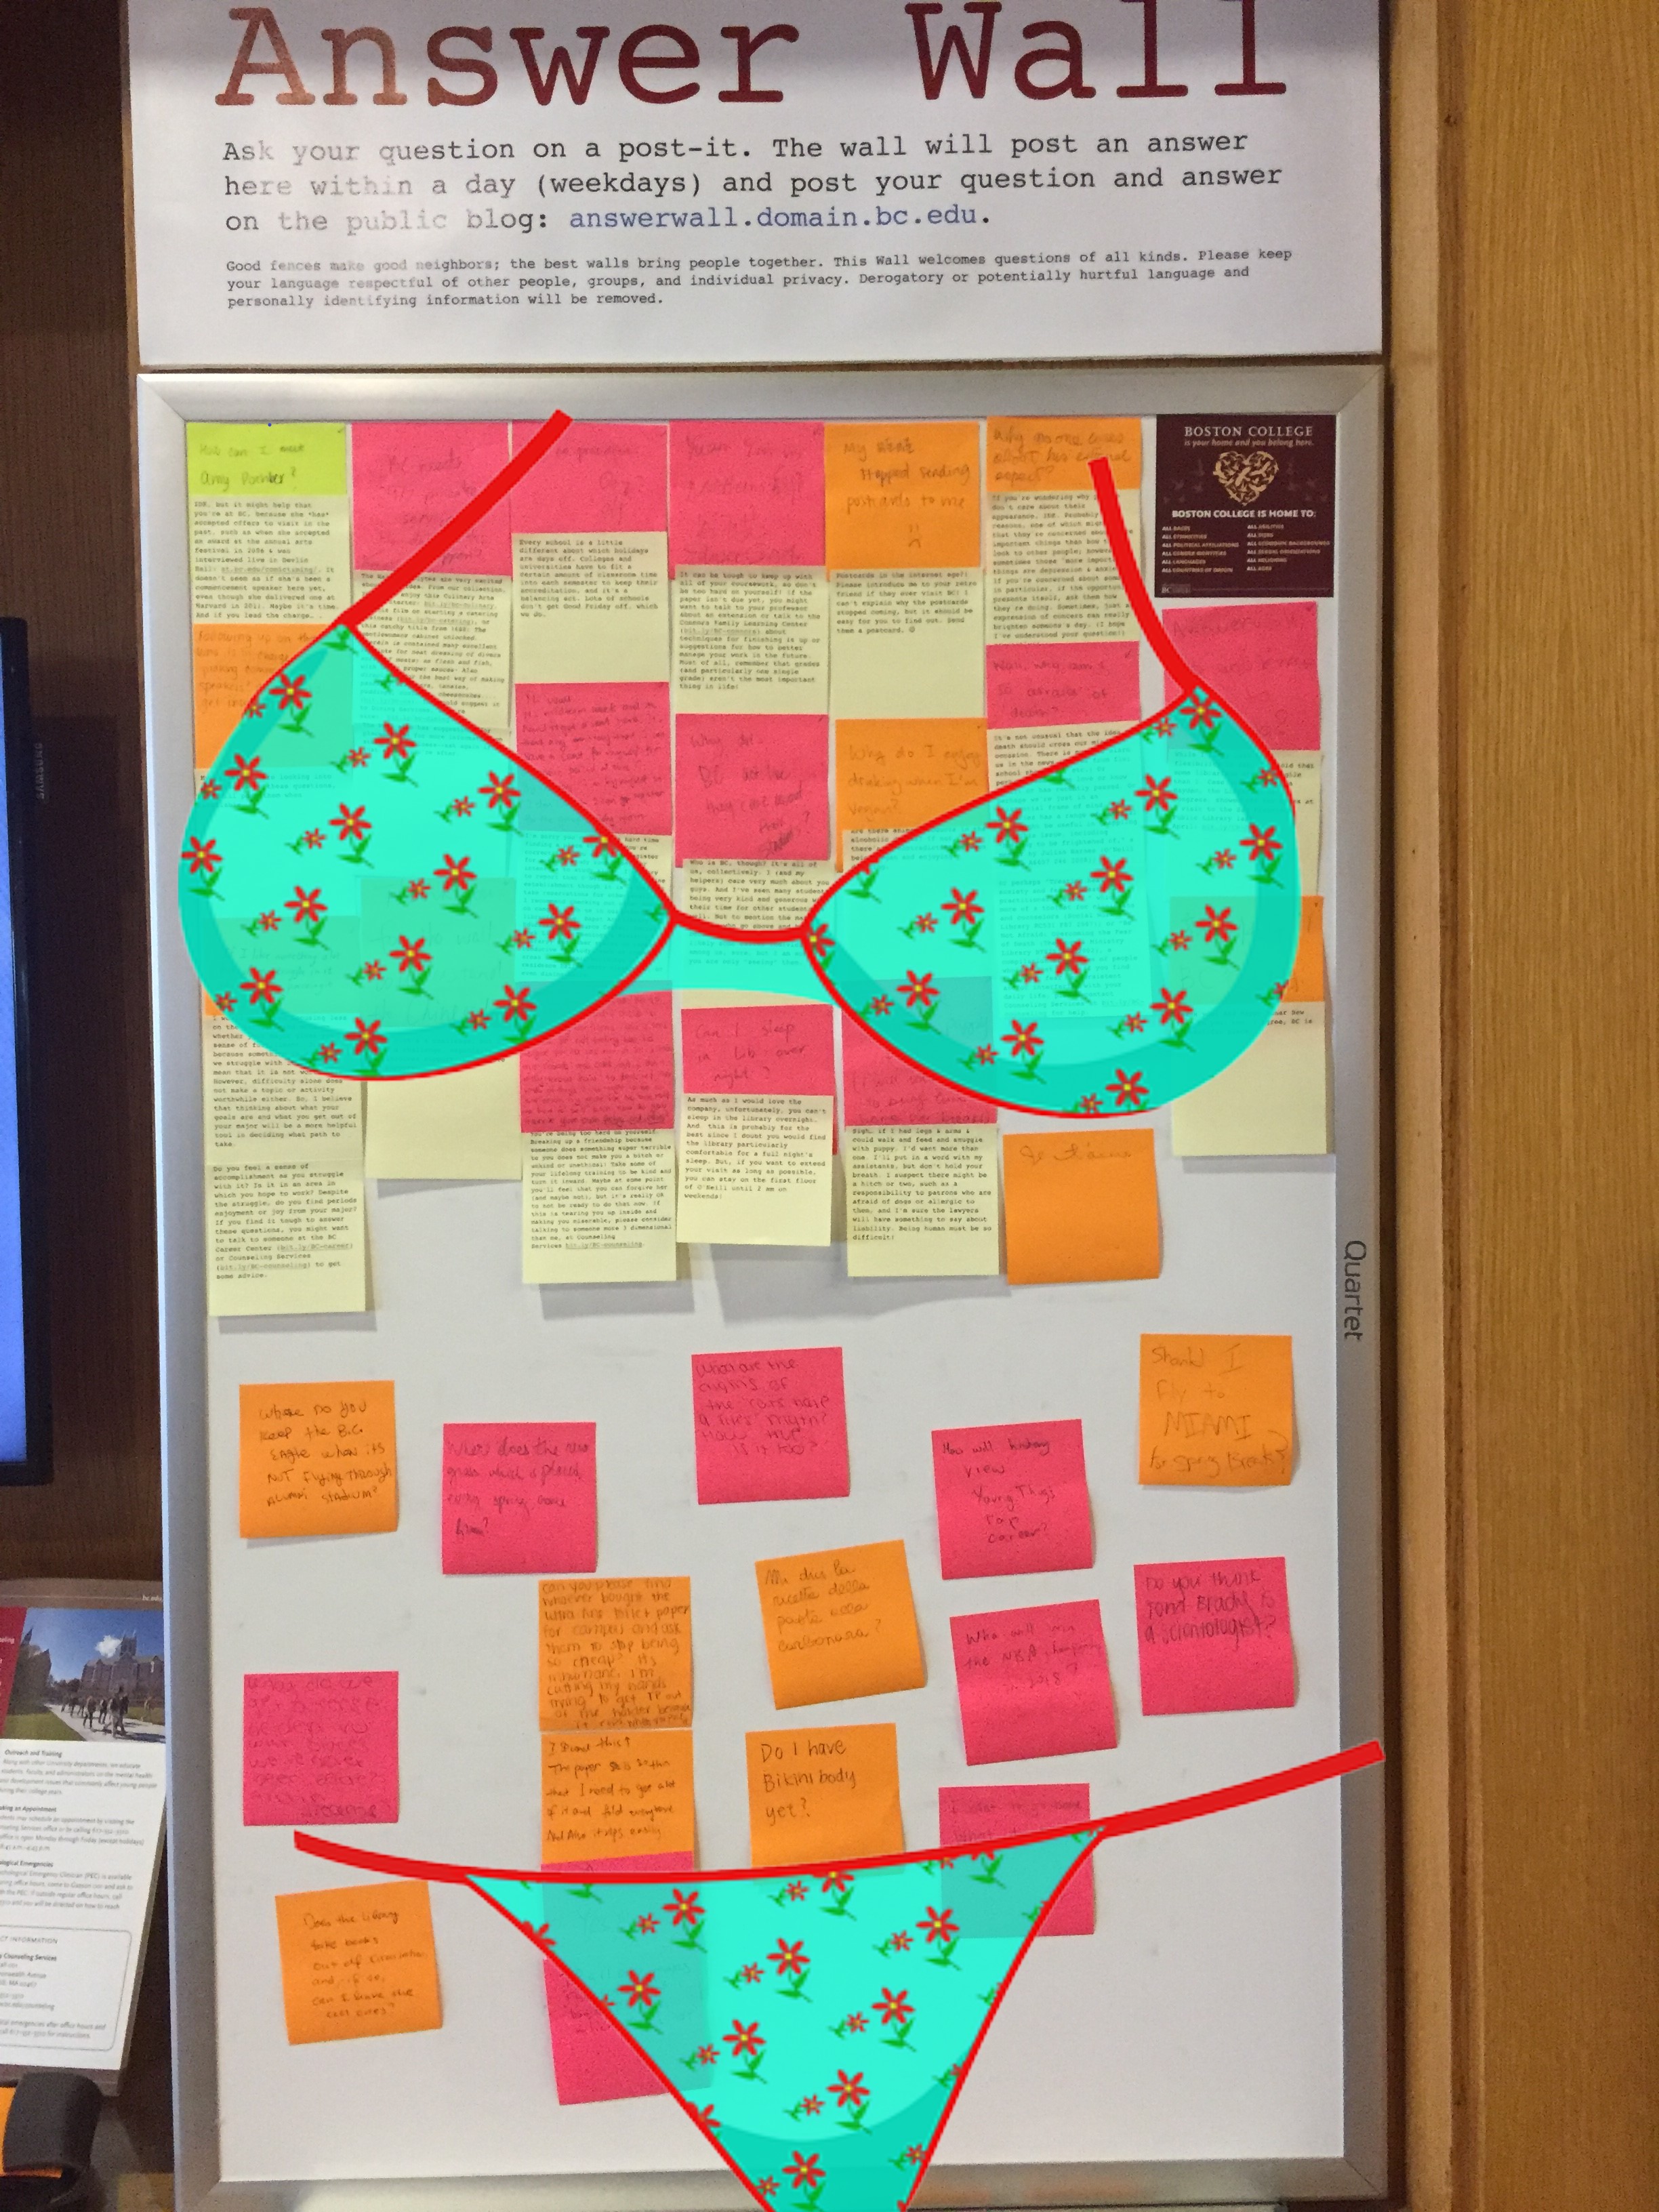 Body Image The Answer Wall